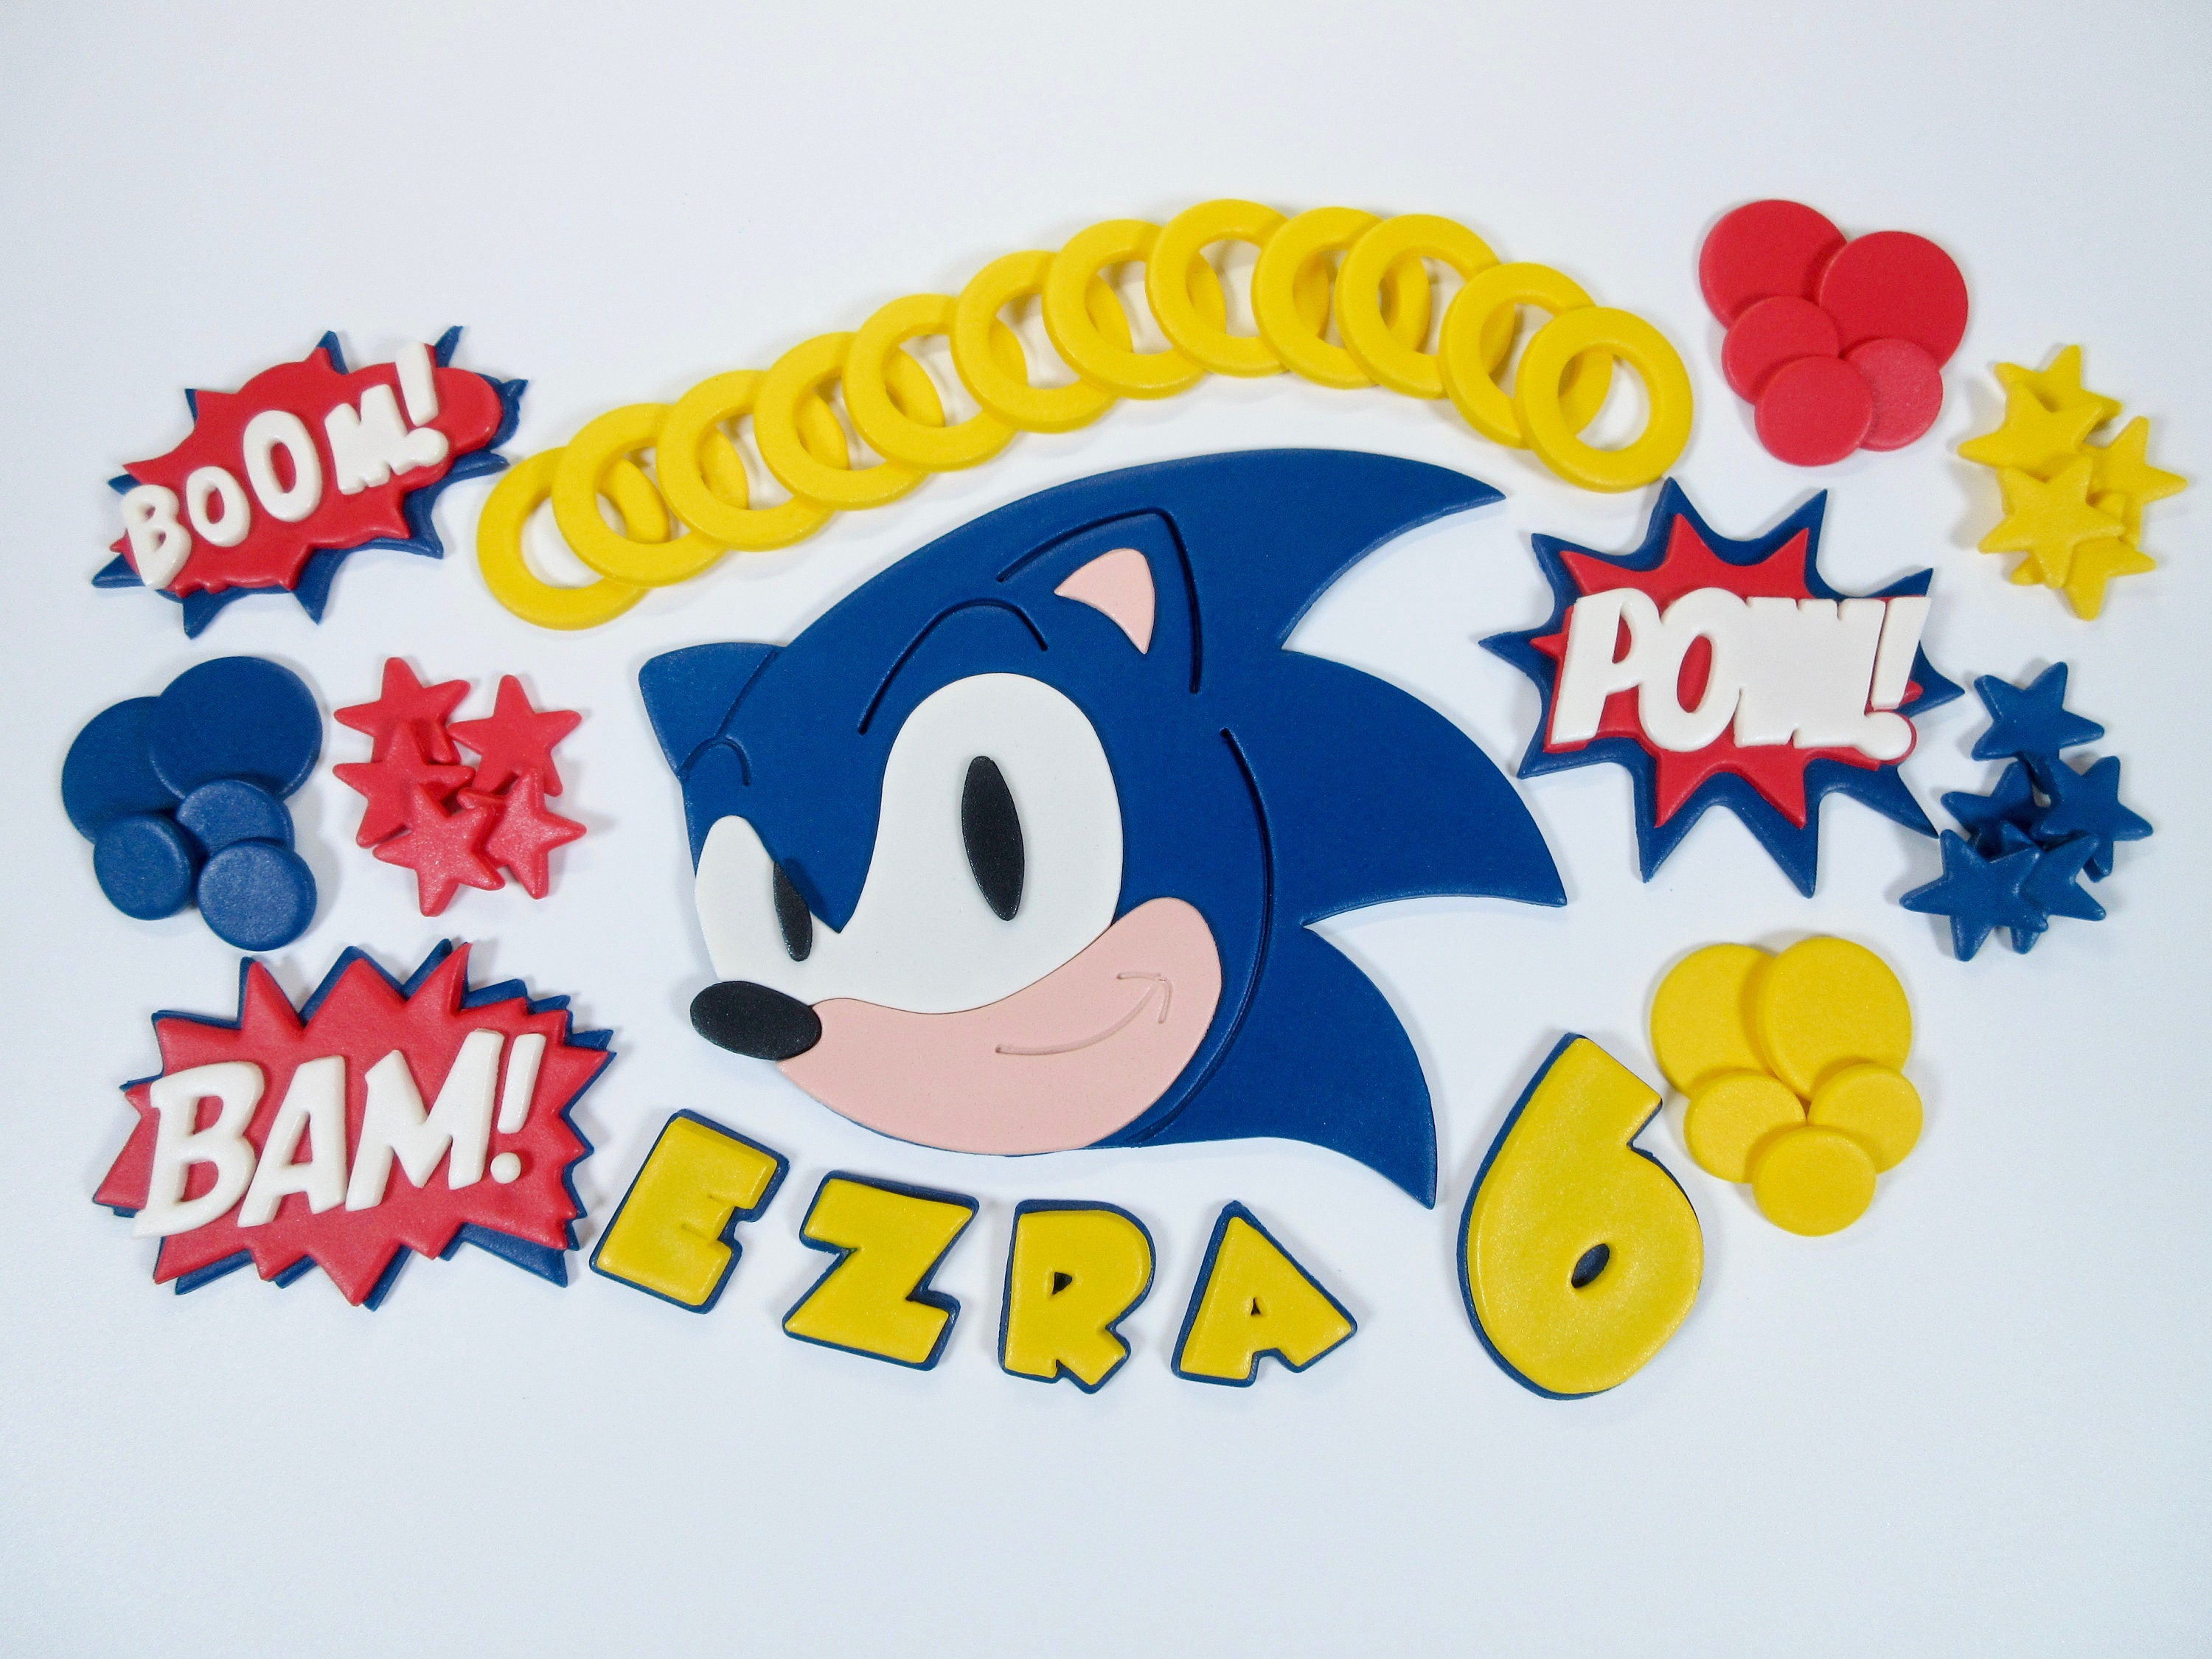 Custom Sonic the Hedgehog Cake Topper, Birthday Cake Topper, Personalize  Age and Name, Gaming Cake Topper 